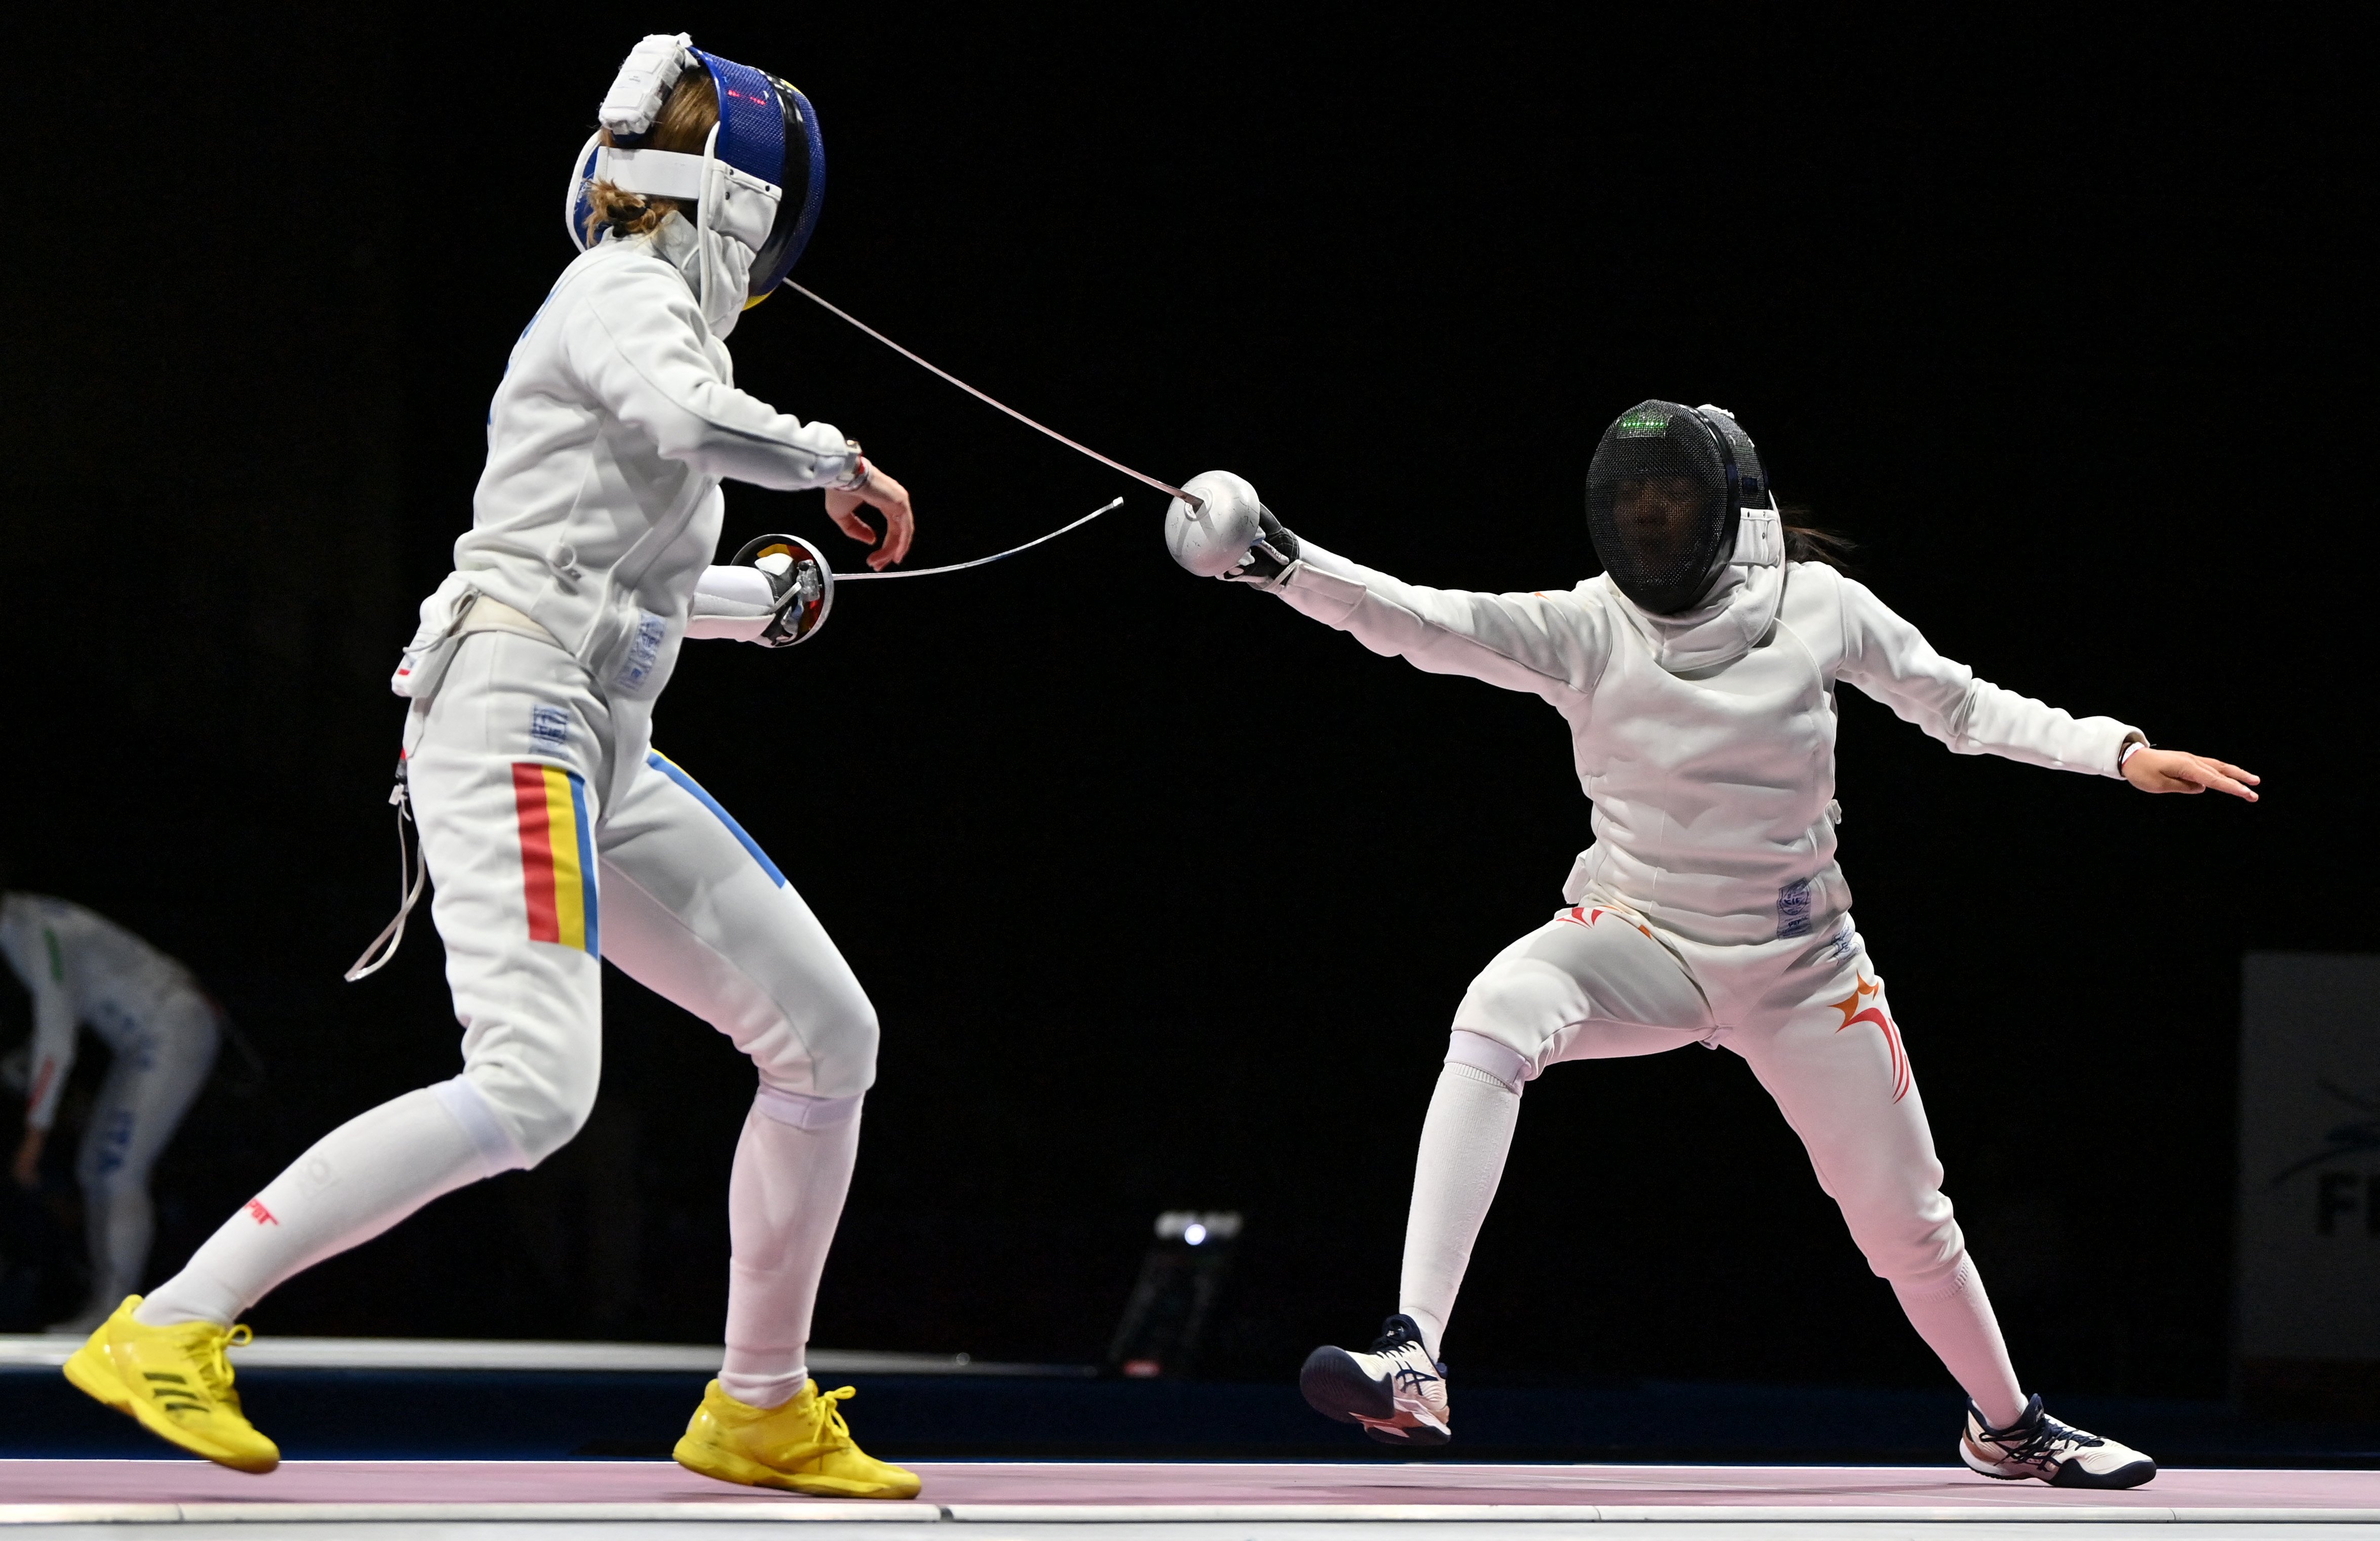 Tokyo 2020 : TeamSG Fencer Kiria Tikanah's Olympic debut ends, after heroic battle against current World No 1!